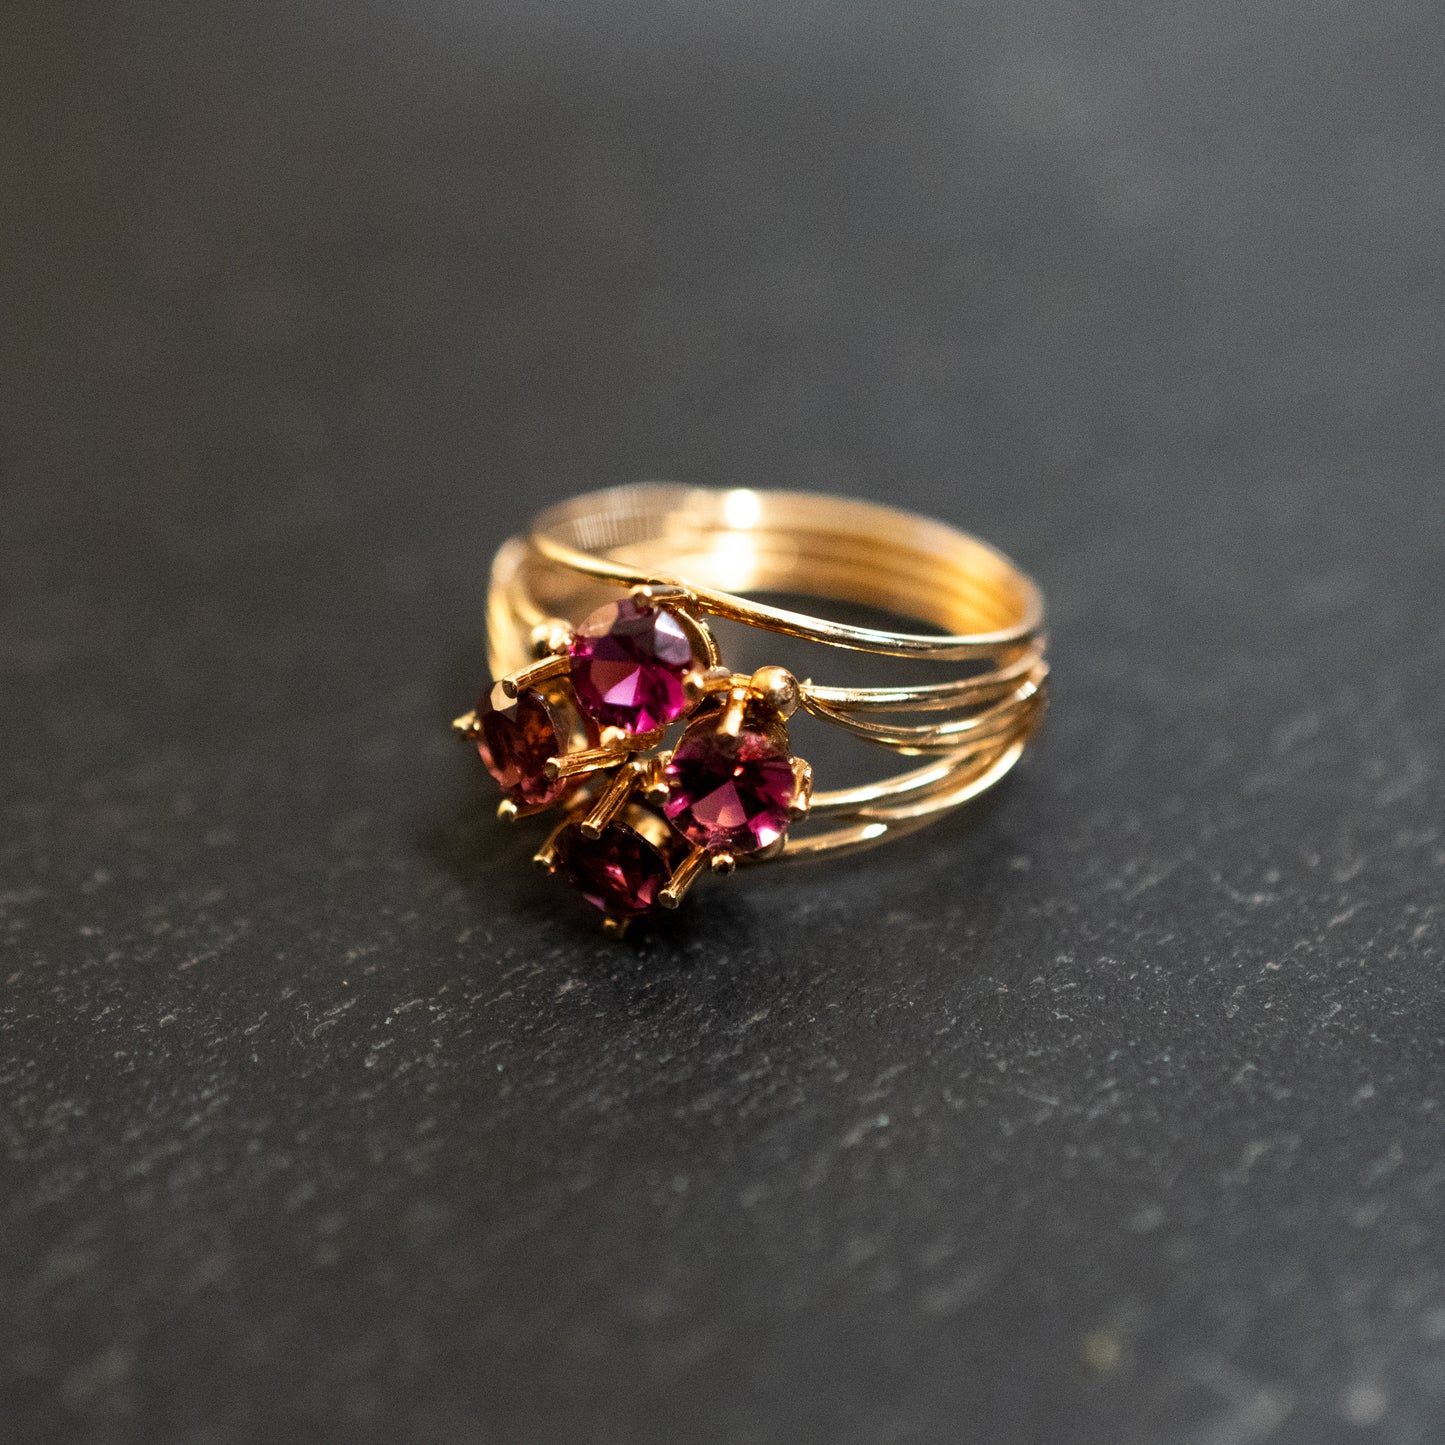 Pre-Owned: One precious yellow metal pink tourmaline four stone cluster ring.